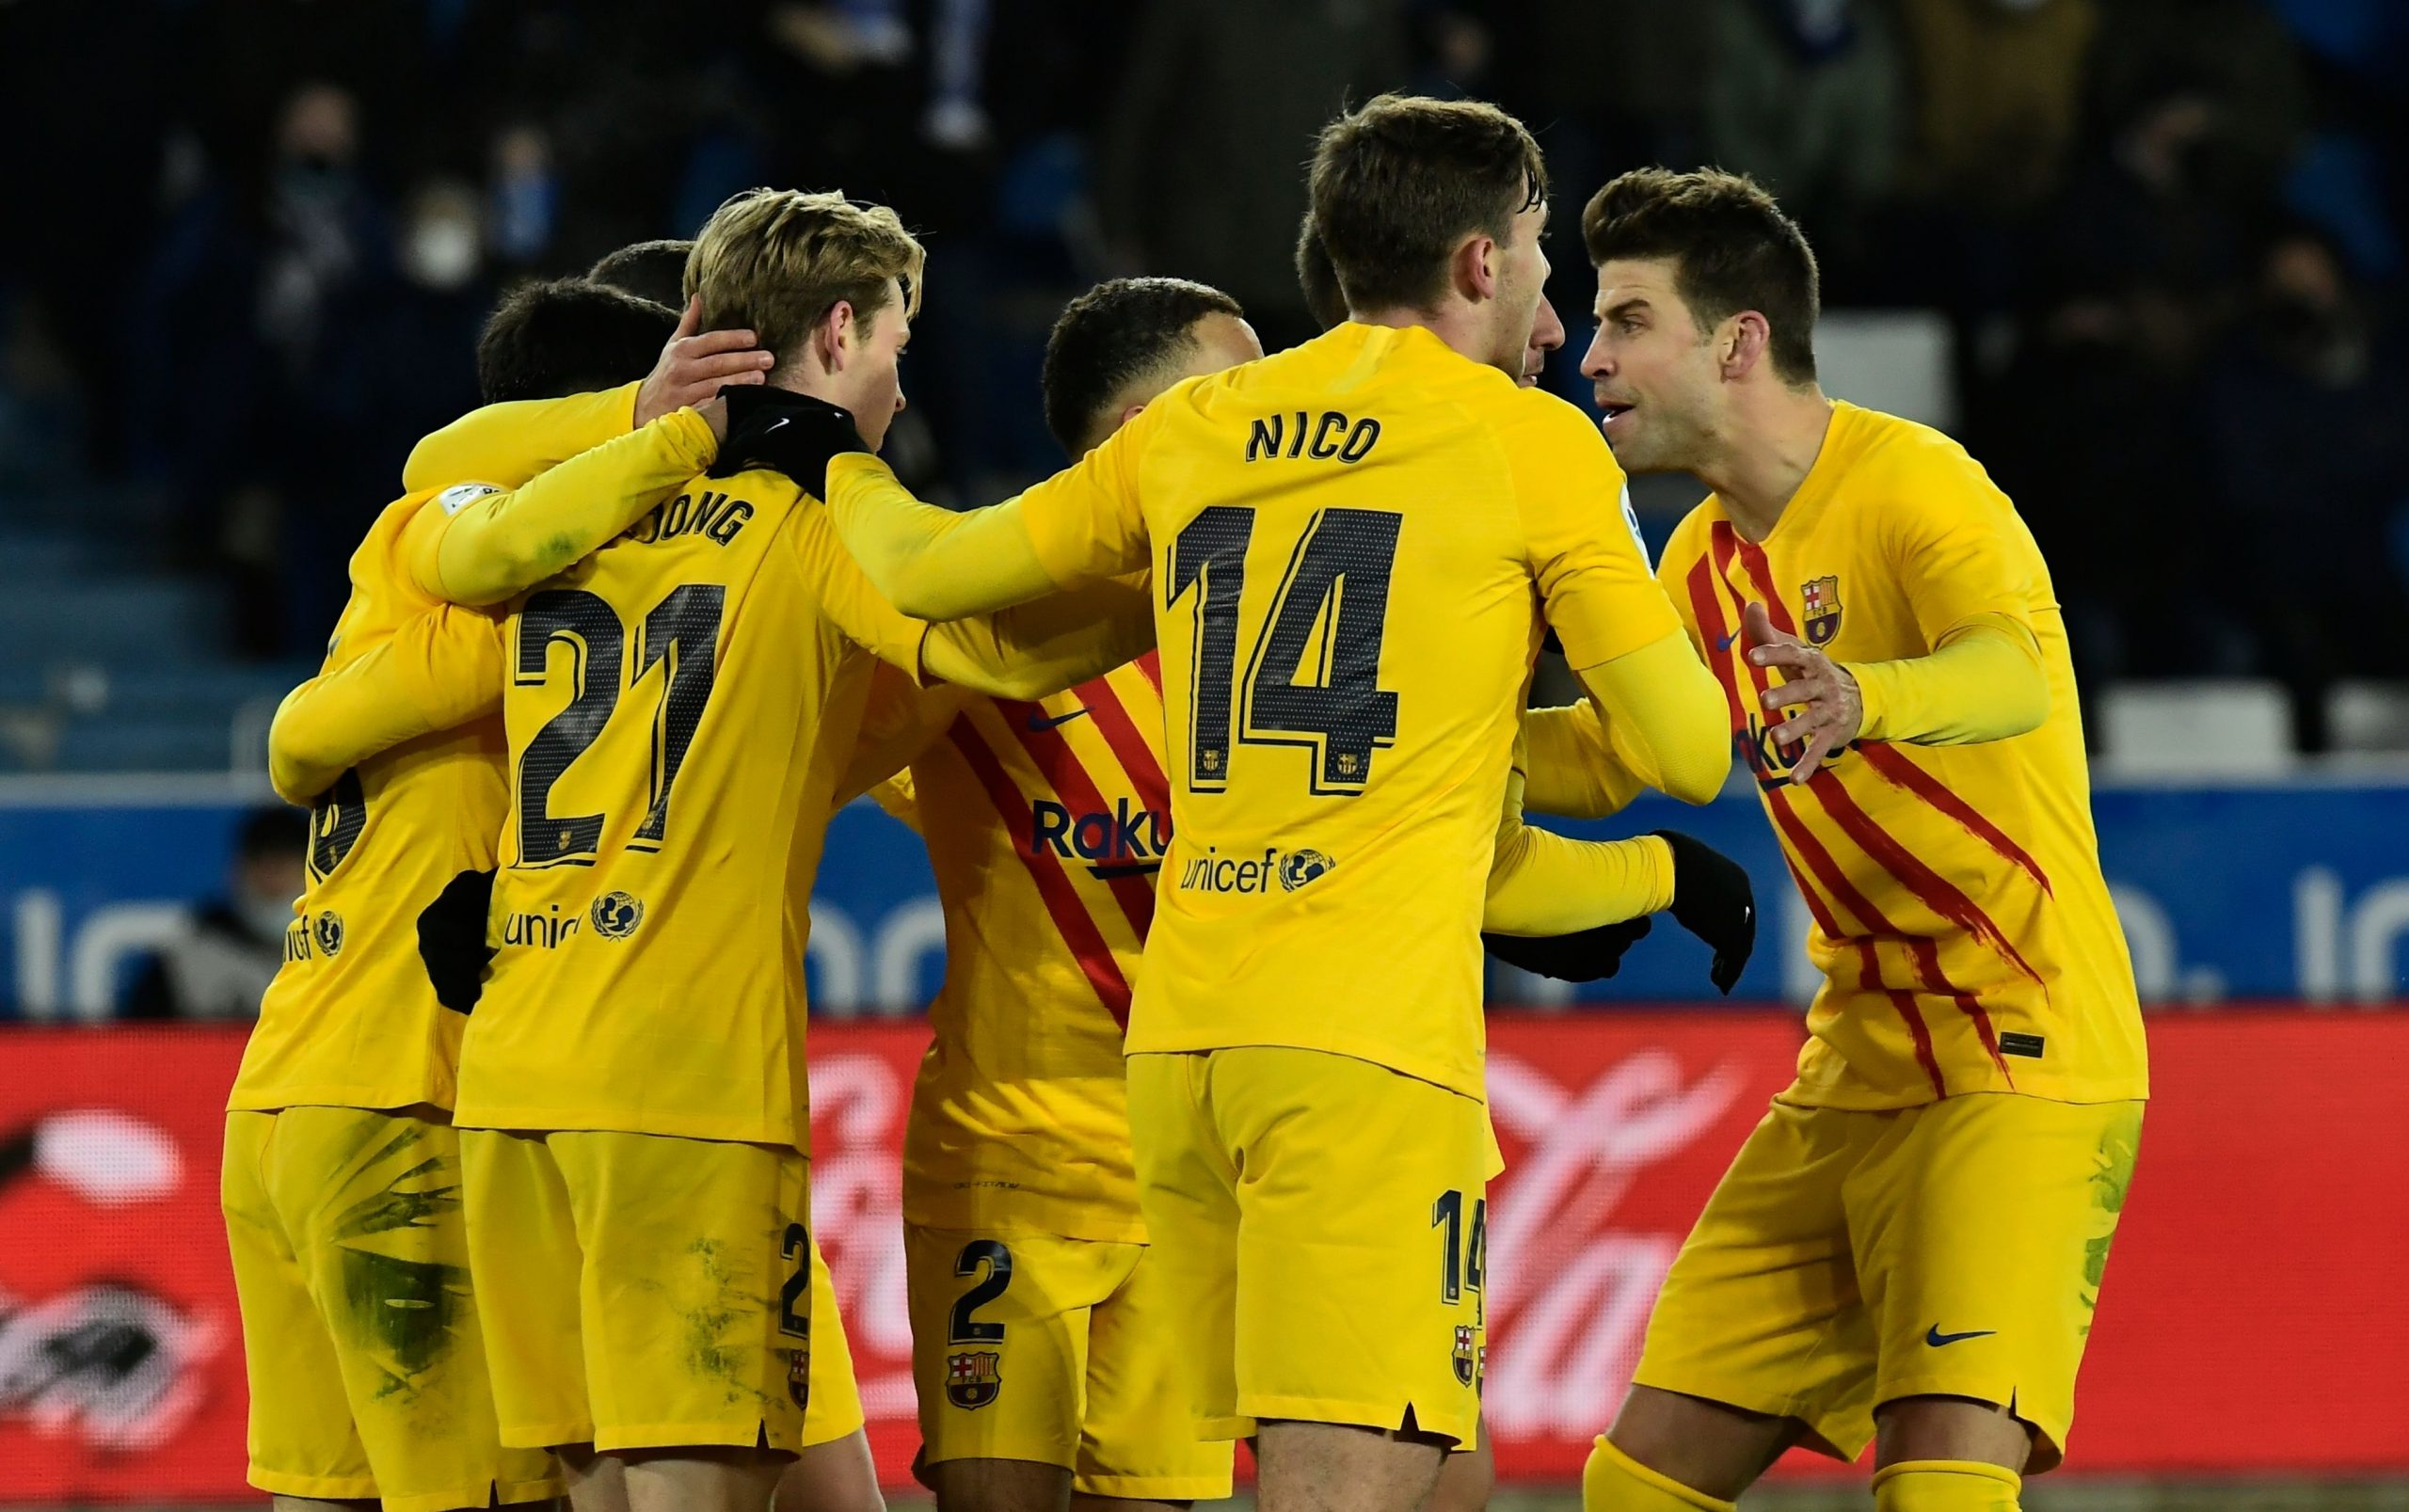 Barcelona wins late to end poor run, Real Madrid held by Elche